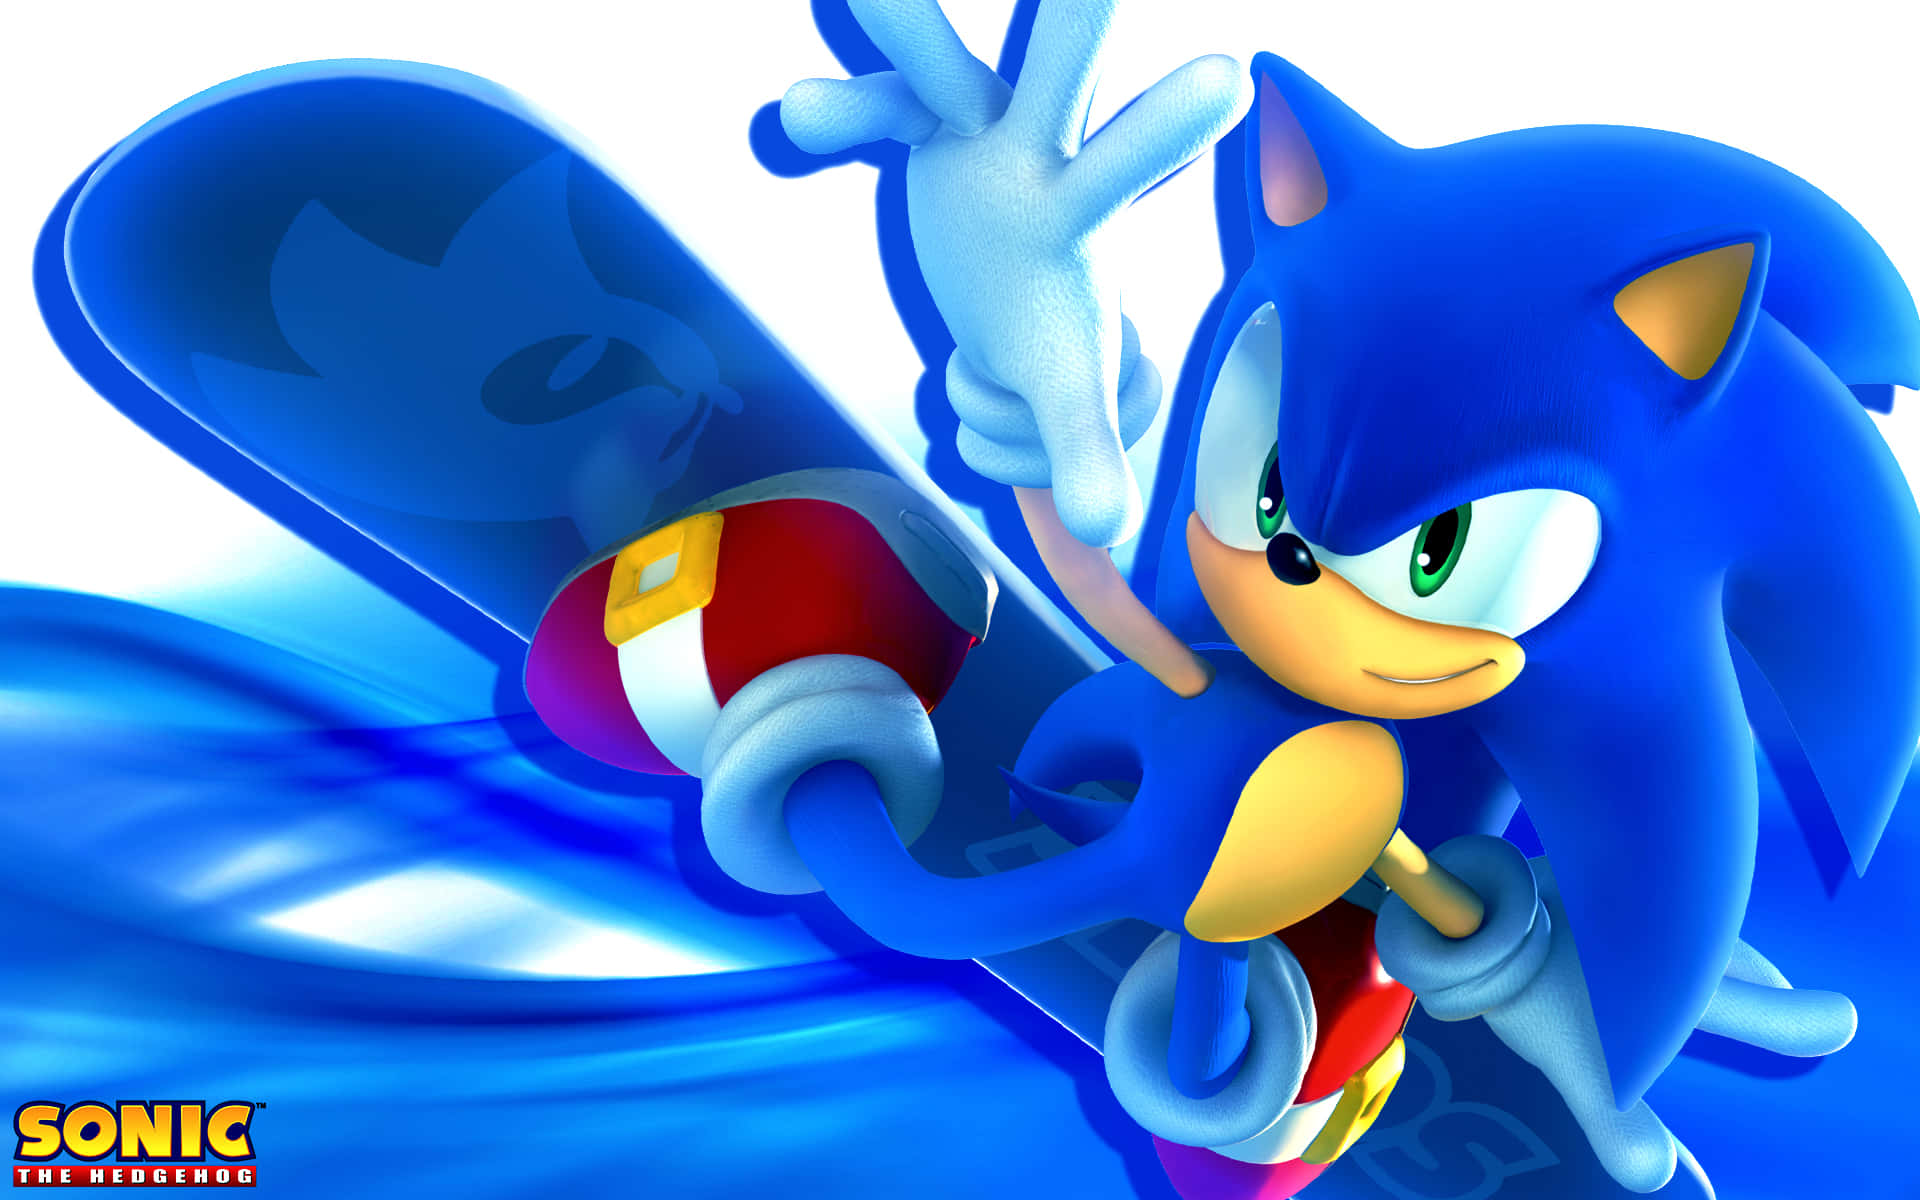 Modern Sonic the Hedgehog in Action Wallpaper